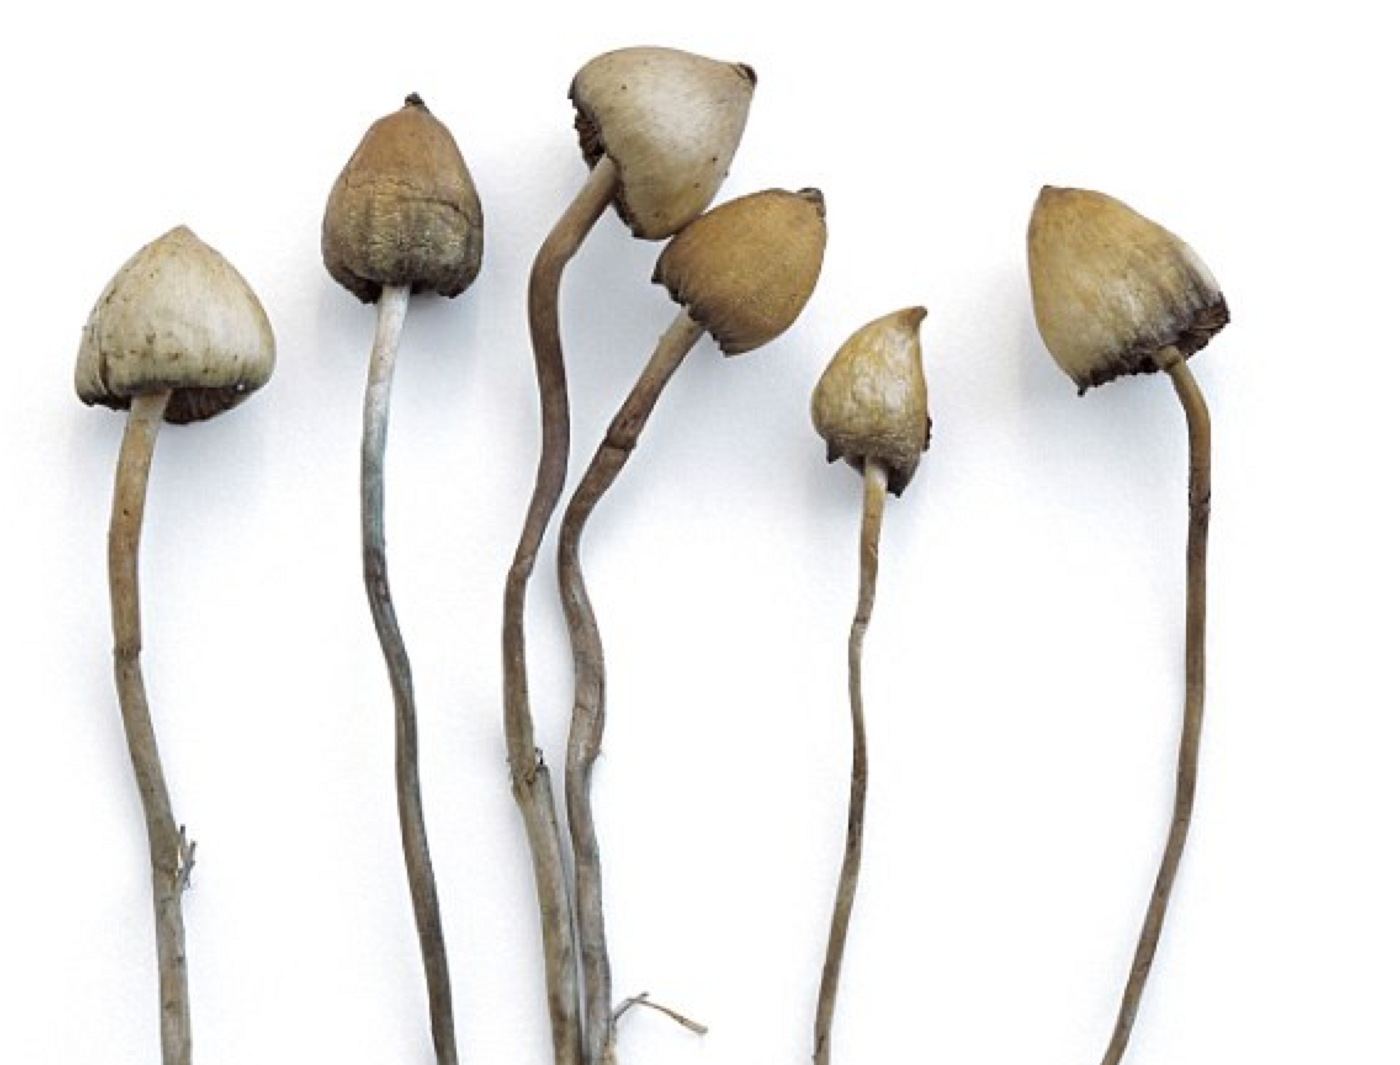 Psilocybin, the active ingredient in magic mushrooms, proves to be an affective combatant against severe depression in a recent U.K.-based clinical trail.